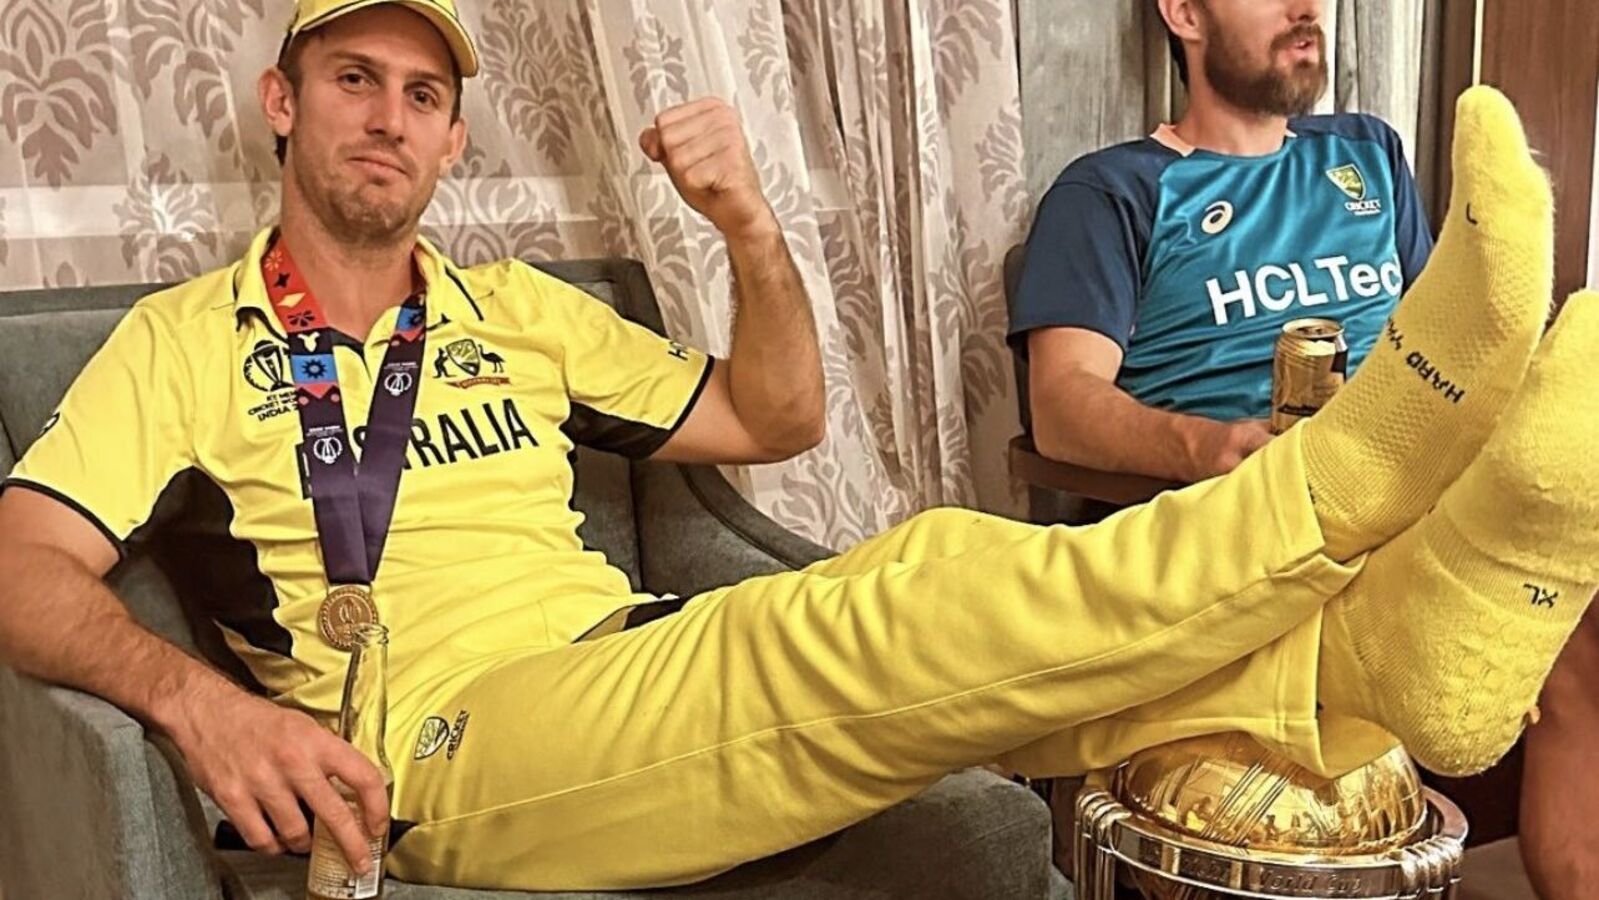 Mitchell Marsh poses with feet atop World Cup trophy after Australia defeat India; internet outraged